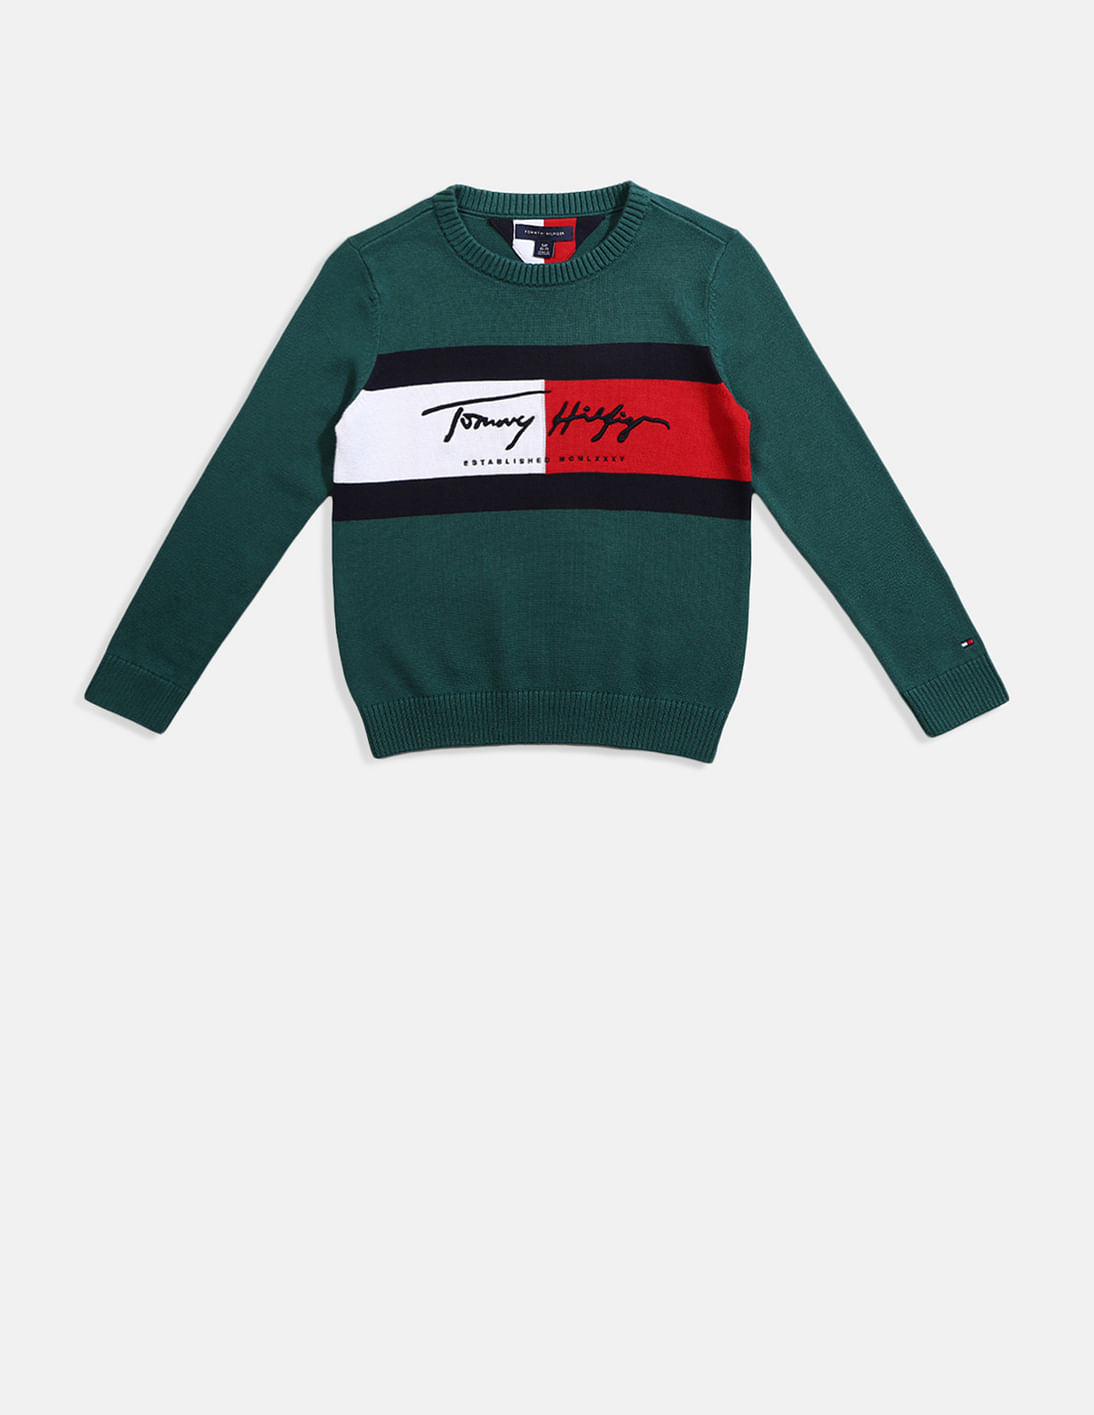 Kids Buy Signature Sweater Colour Block Boys Flag Tommy Hilfiger Green